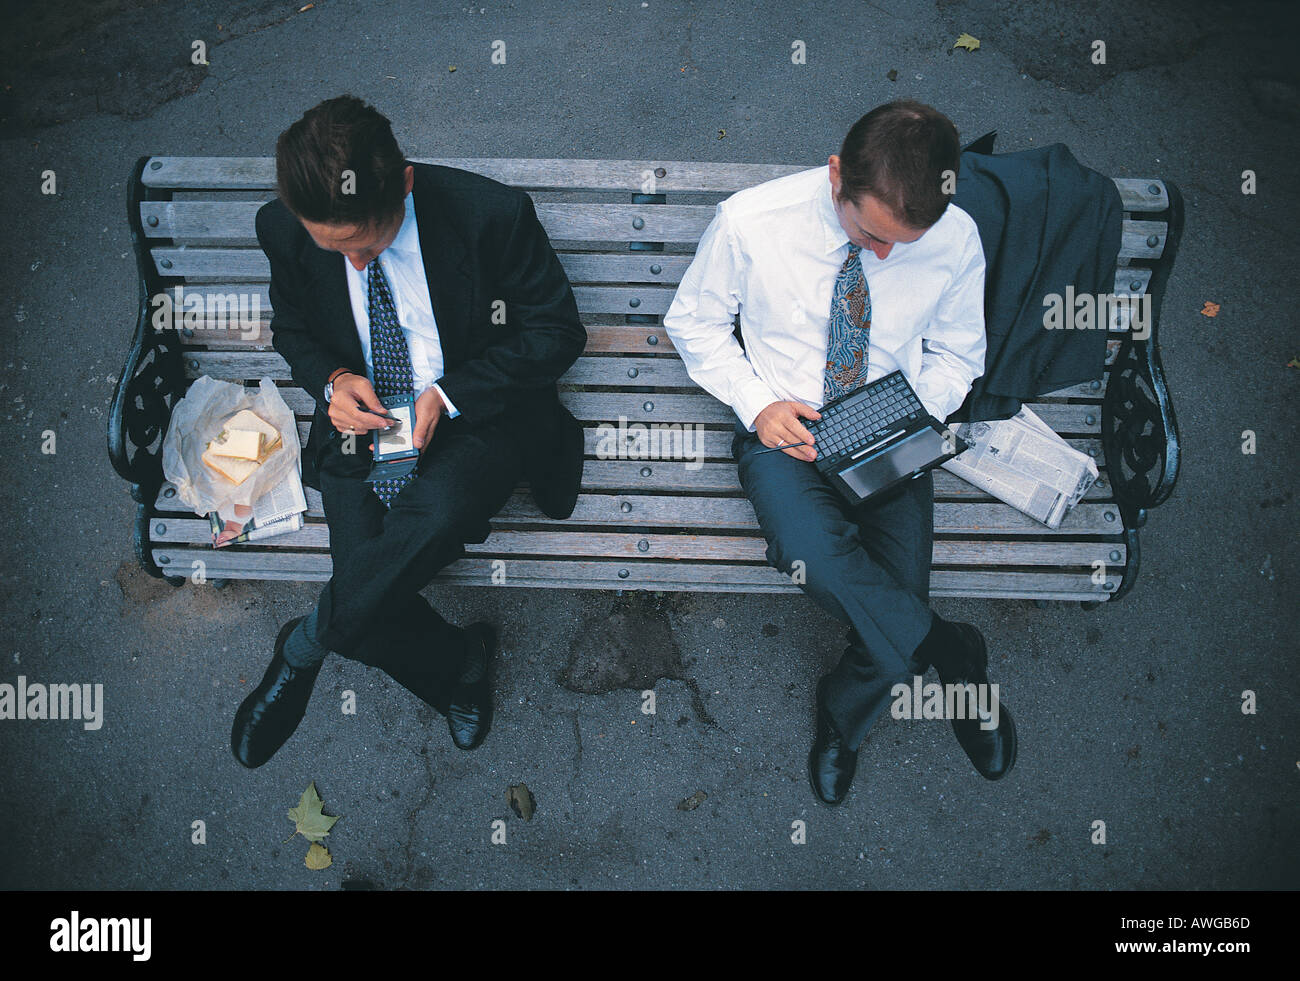 Two business men sitting on a bench using a palm and laptop having lunch Stock Photo